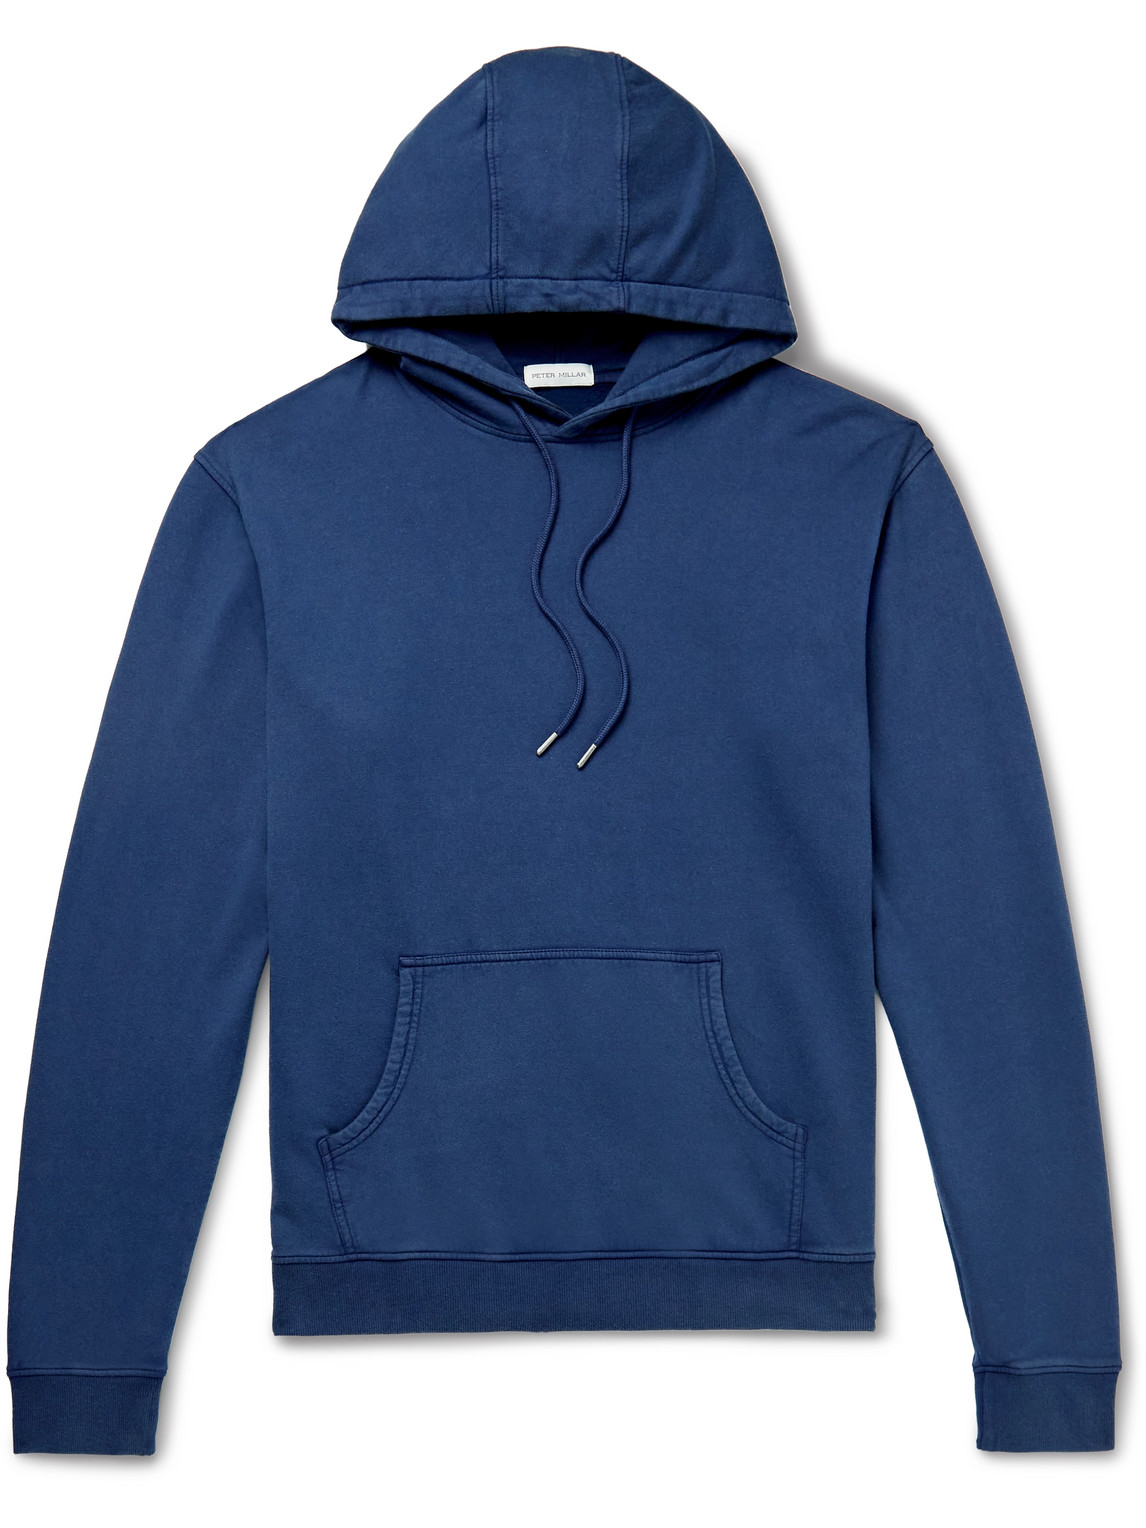 PETER MILLAR LAVA WASH STRETCH COTTON AND MODAL-BLEND JERSEY HOODIE